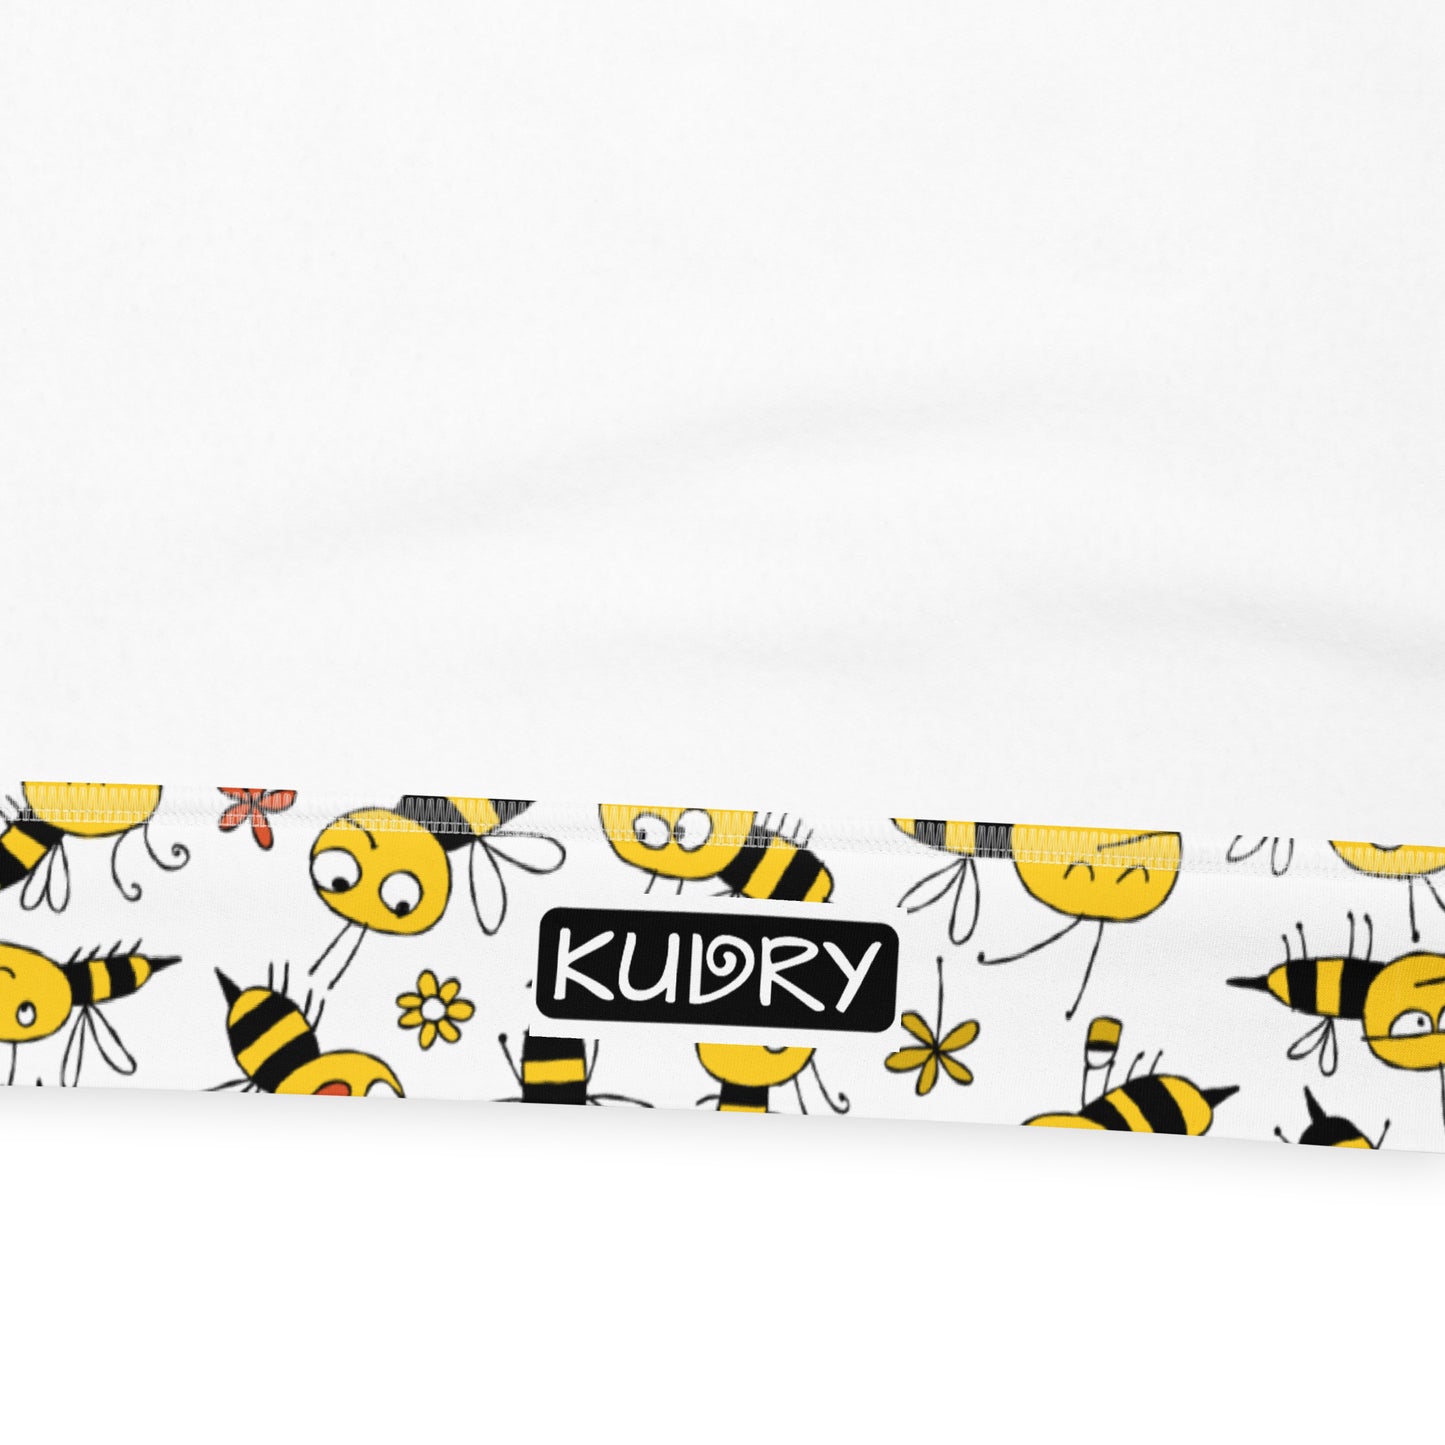 Unisex Hoodie white with funny yellow bees family. Inside Logo - Kudry